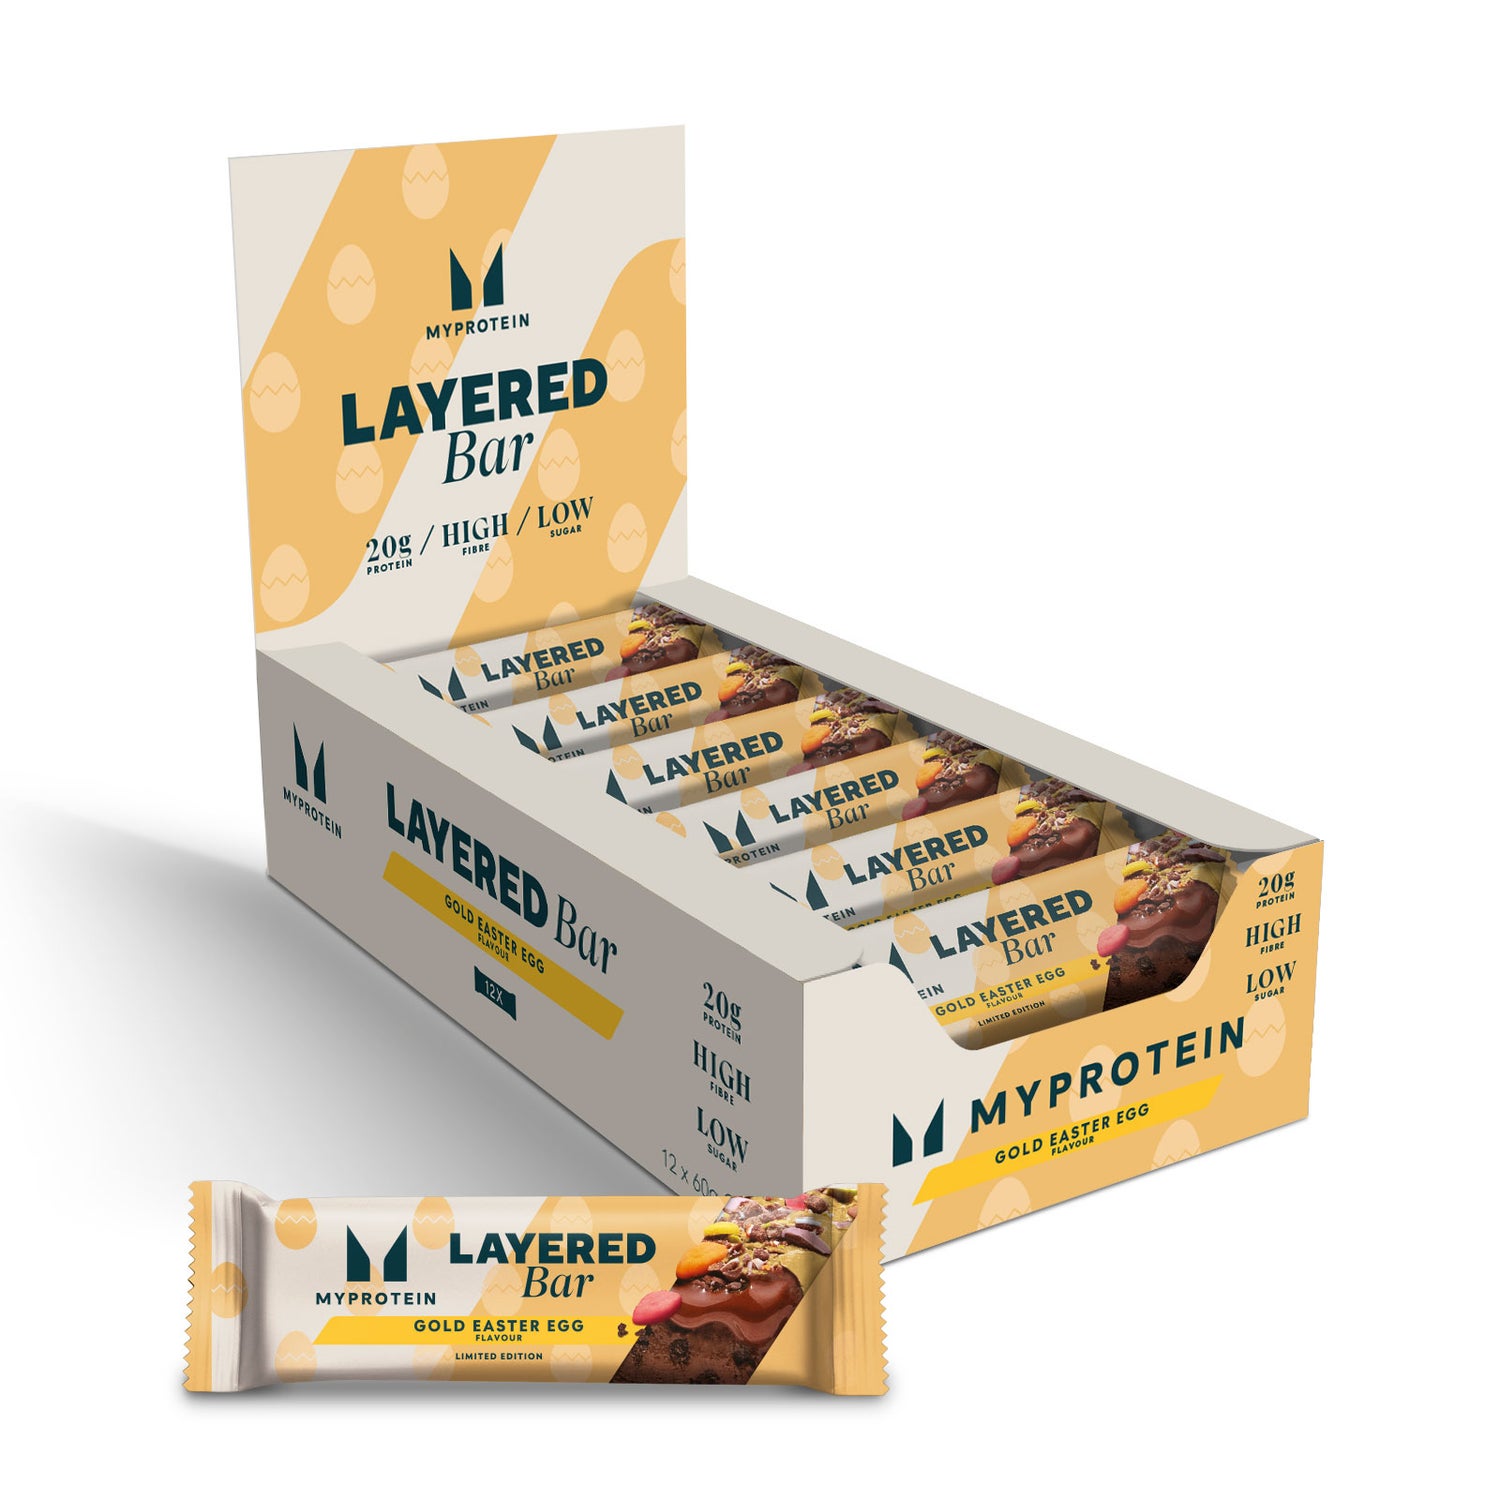 Limited Edition Layered Protein Bar - Gold Easter Egg - Limited Edition - Gold Choc Easter Egg